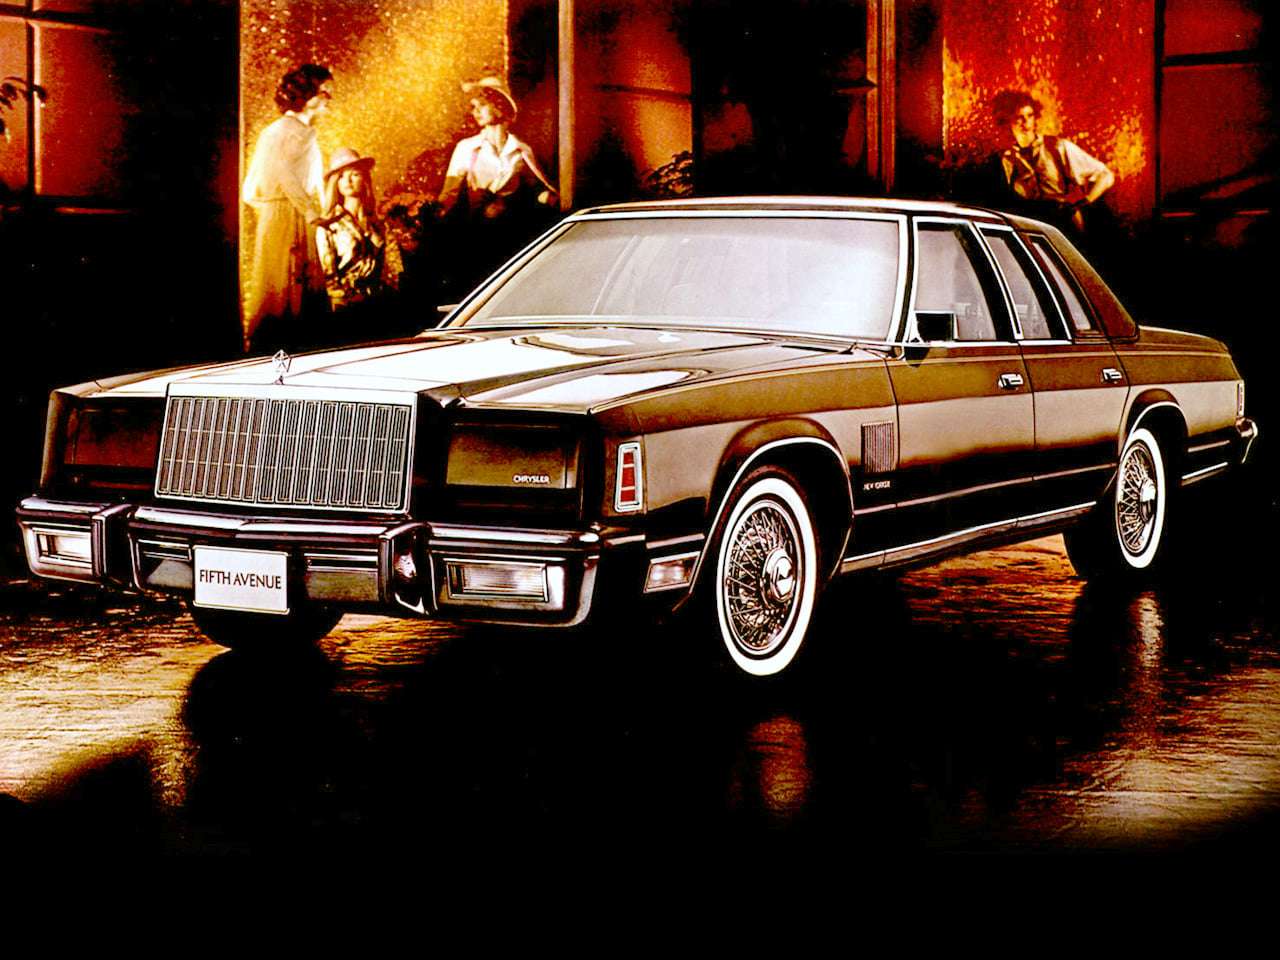 1980 Chrysler New Yorker Fifth Avenue puzzle online